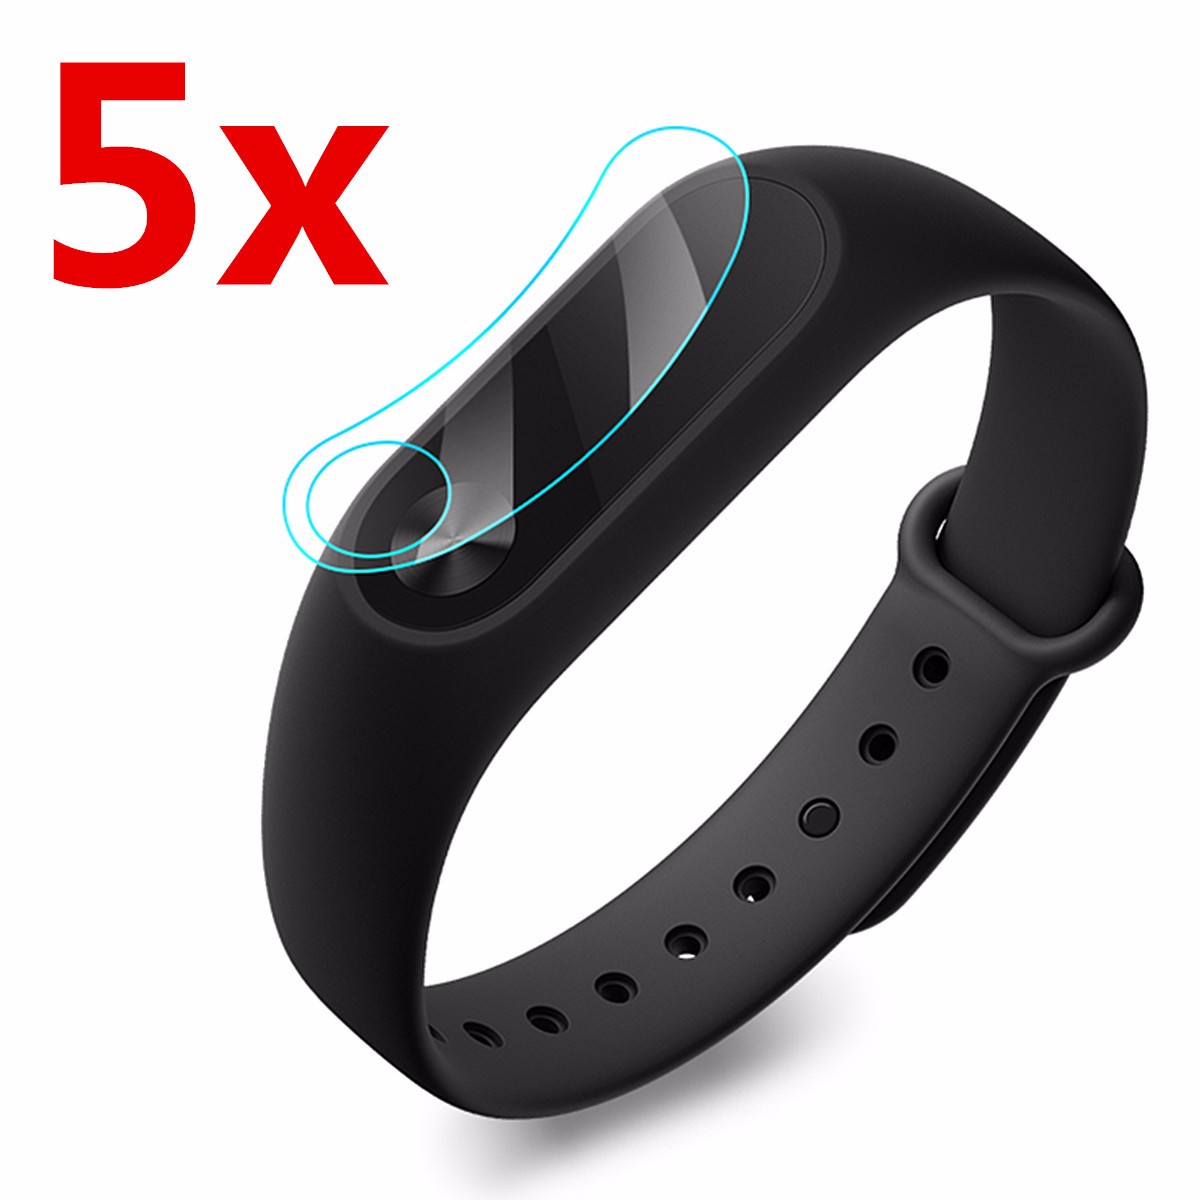 5 x Anti Scratch Clear Screen Protector Film Shield For Xiaomi Miband 2 Tracker